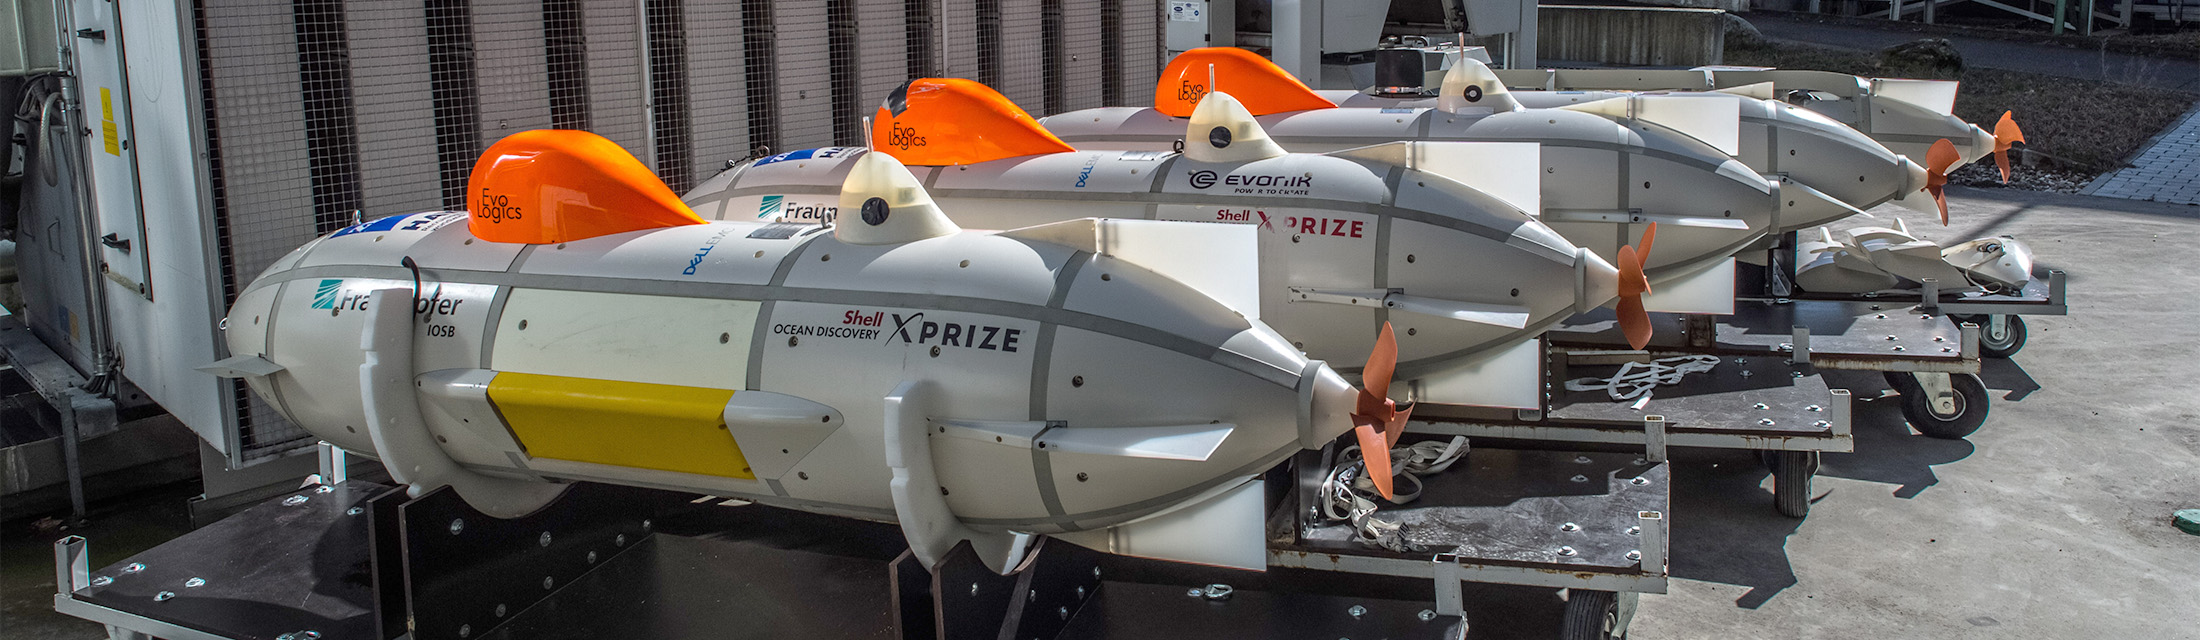 Five Great Divers Shell Ocean Discovery XPRIZE Fraunhofer IOSB